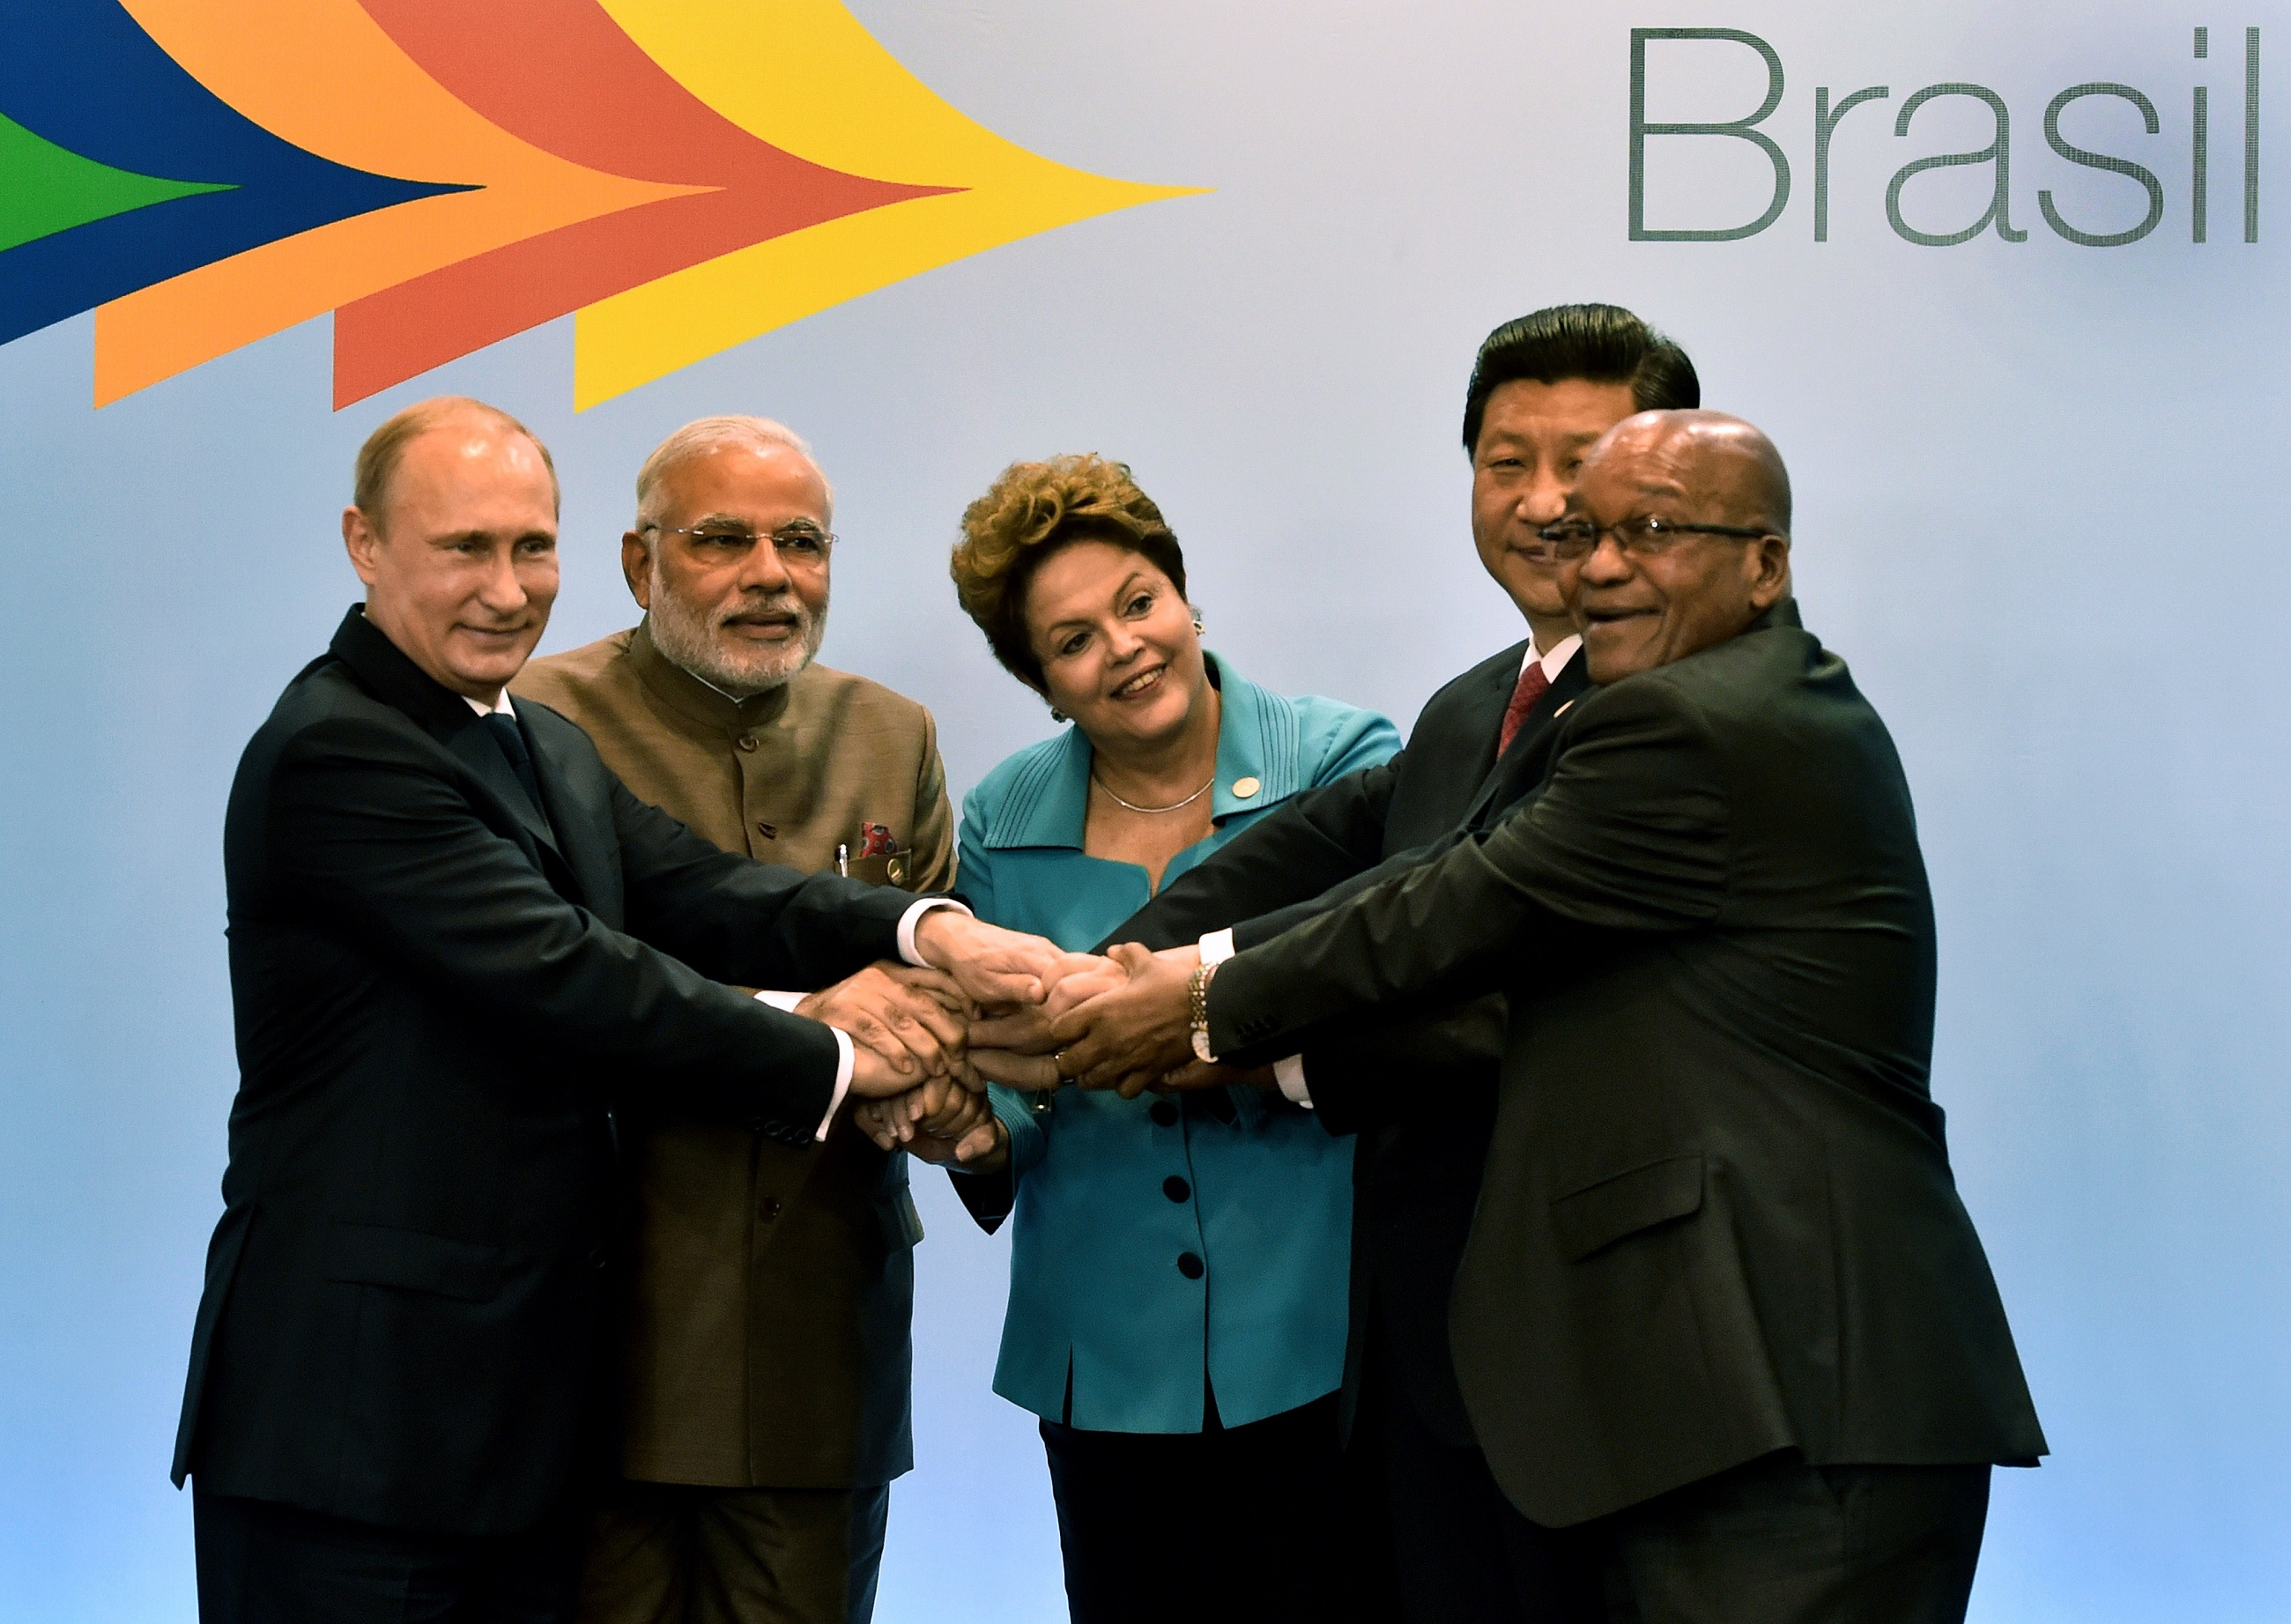 Photograph of the following representatives shaking hands Russian President Vladimir Putin, India's PM Narendra Modi, Brazilian President Dilma Rousseff, China's President Xi Jinping and South Africa's Jacob Zuma gesture during the 6th BRICS Summit in Fortaleza, Brazil, on July 15, 2014